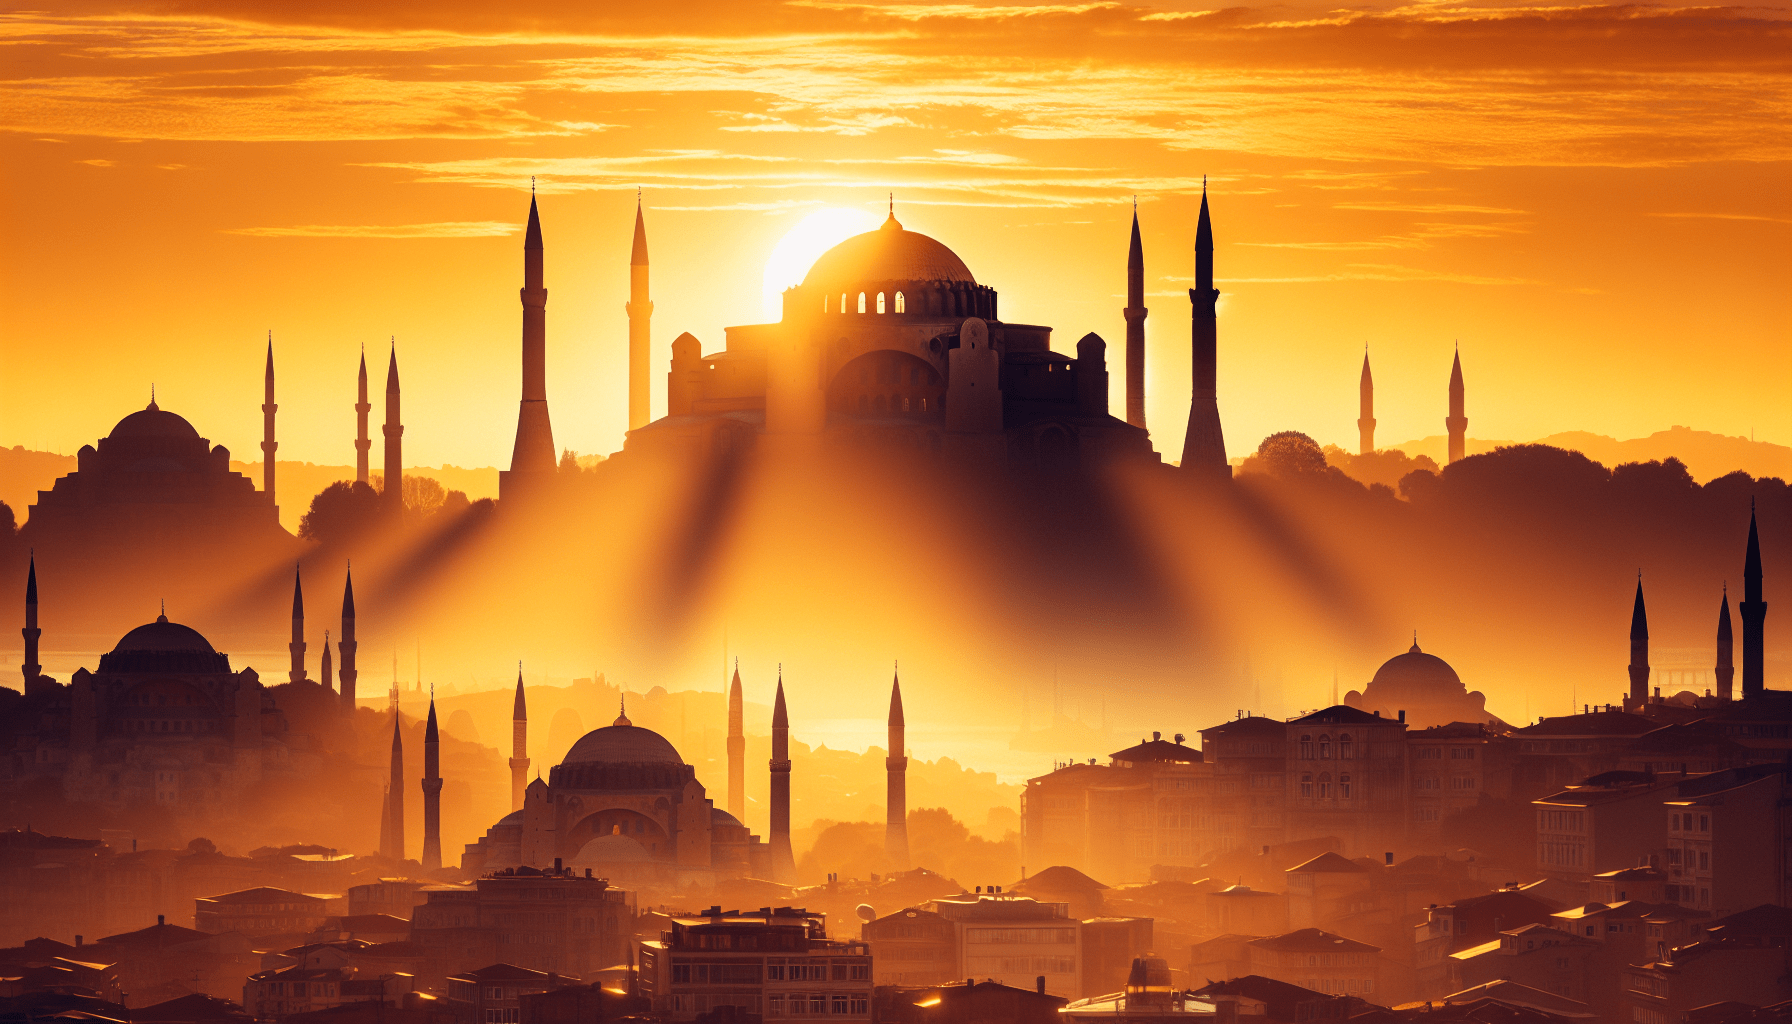 A sunrise illuminates a skyline with a prominent domed building and multiple minarets, creating a silhouette against the orange sky, reminiscent of the architectural beauty found in Turkey.